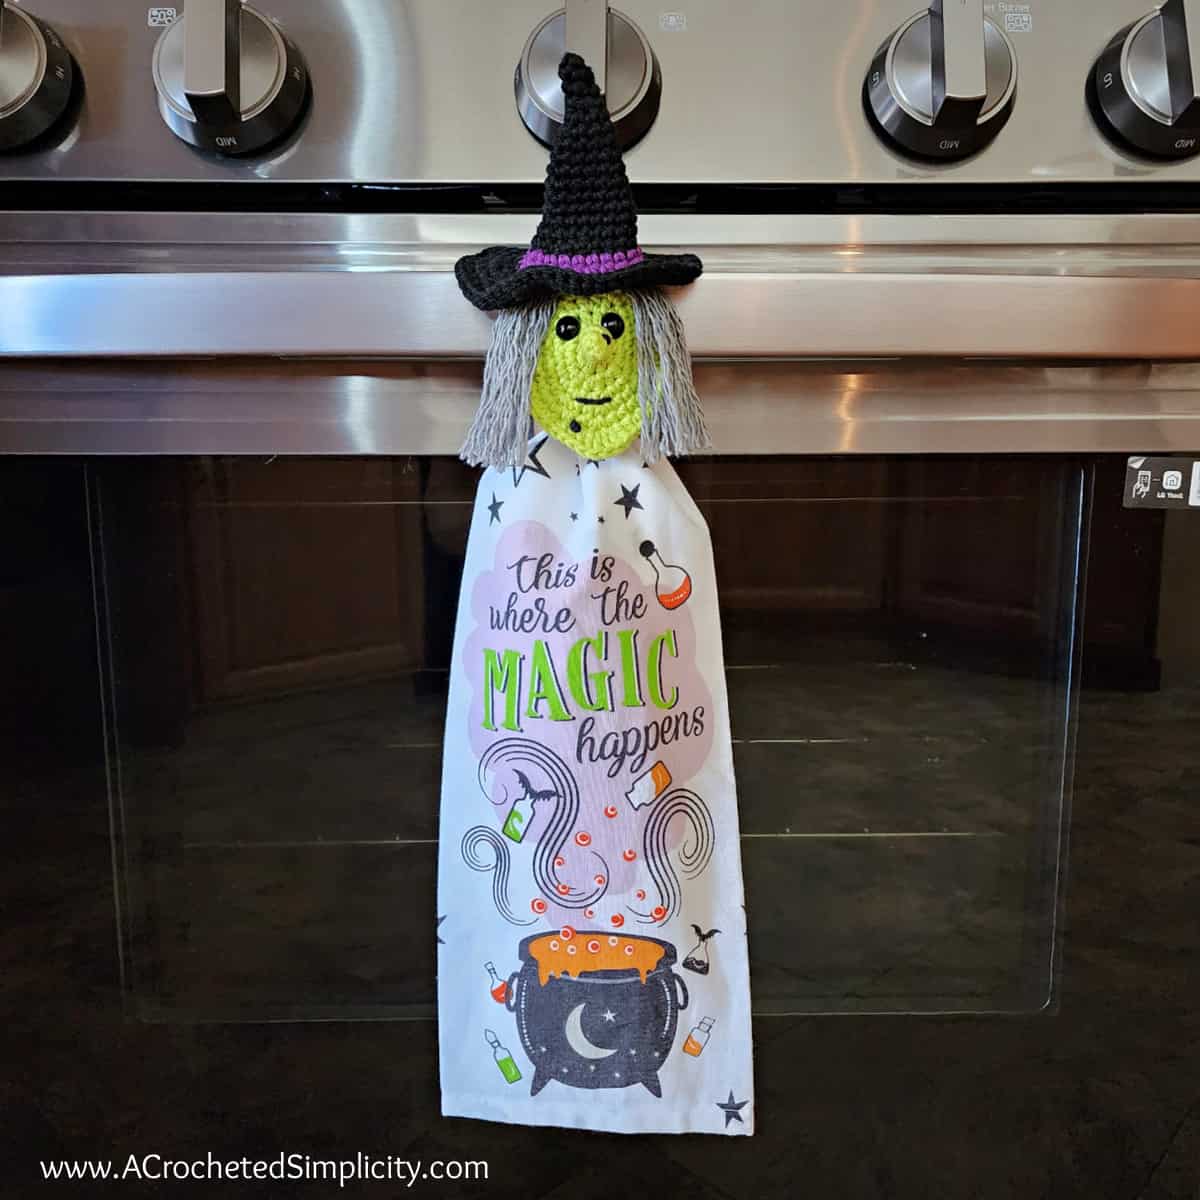 Halloween witch crochet towel holder on stove holding kitchen towel